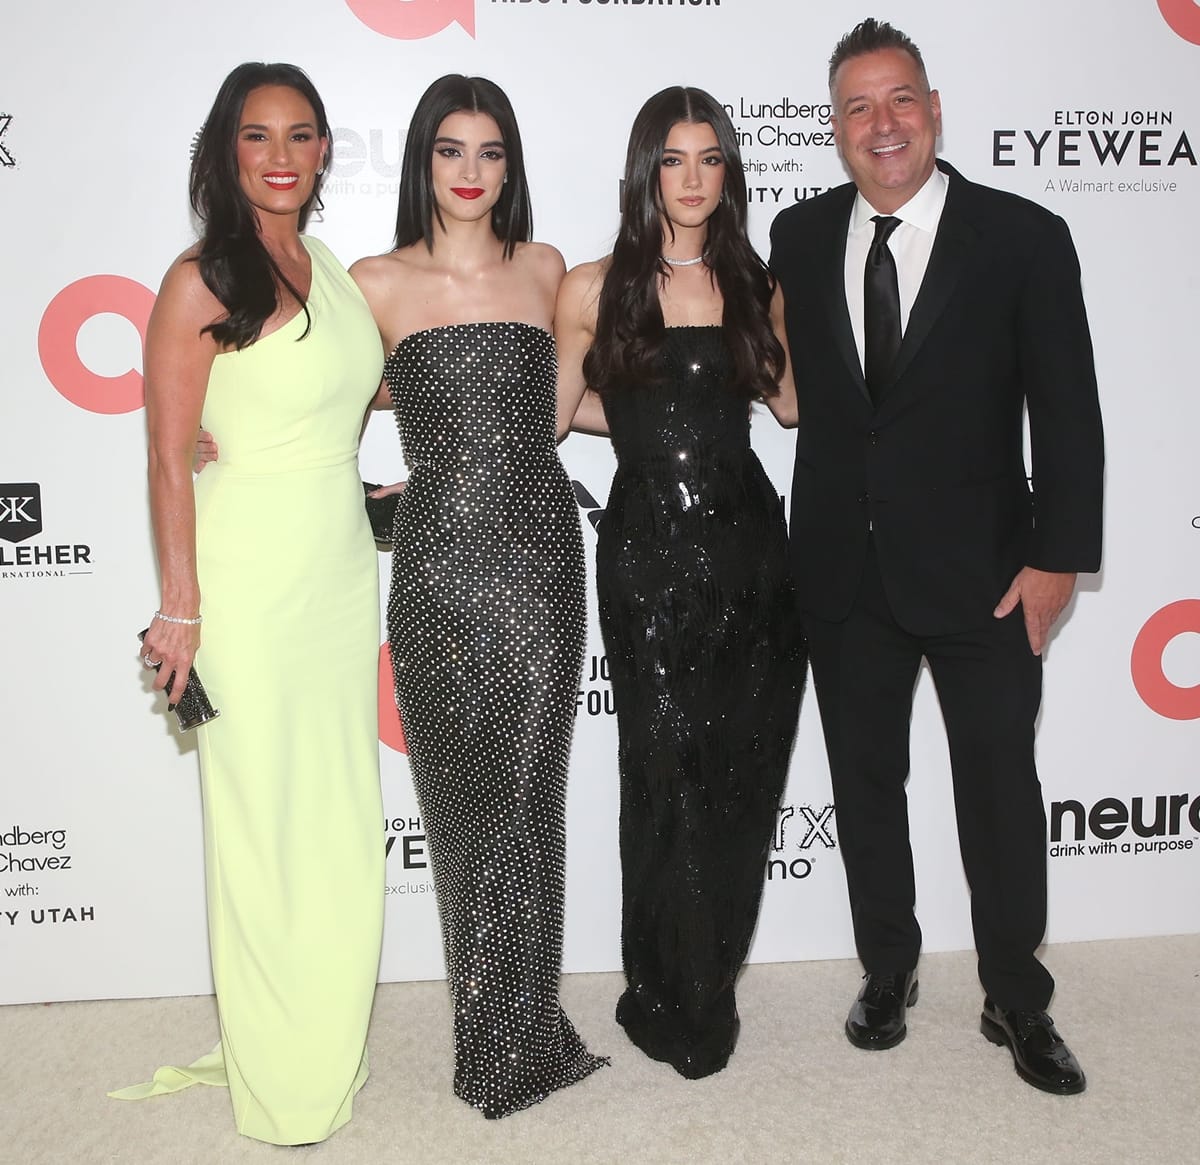 Heidi D’Amelio, Dixie D'Amelio, Charli D'Amelio, and Marc D’Amelio attend Elton John AIDS Foundation's 30th Annual Academy Awards Viewing Party